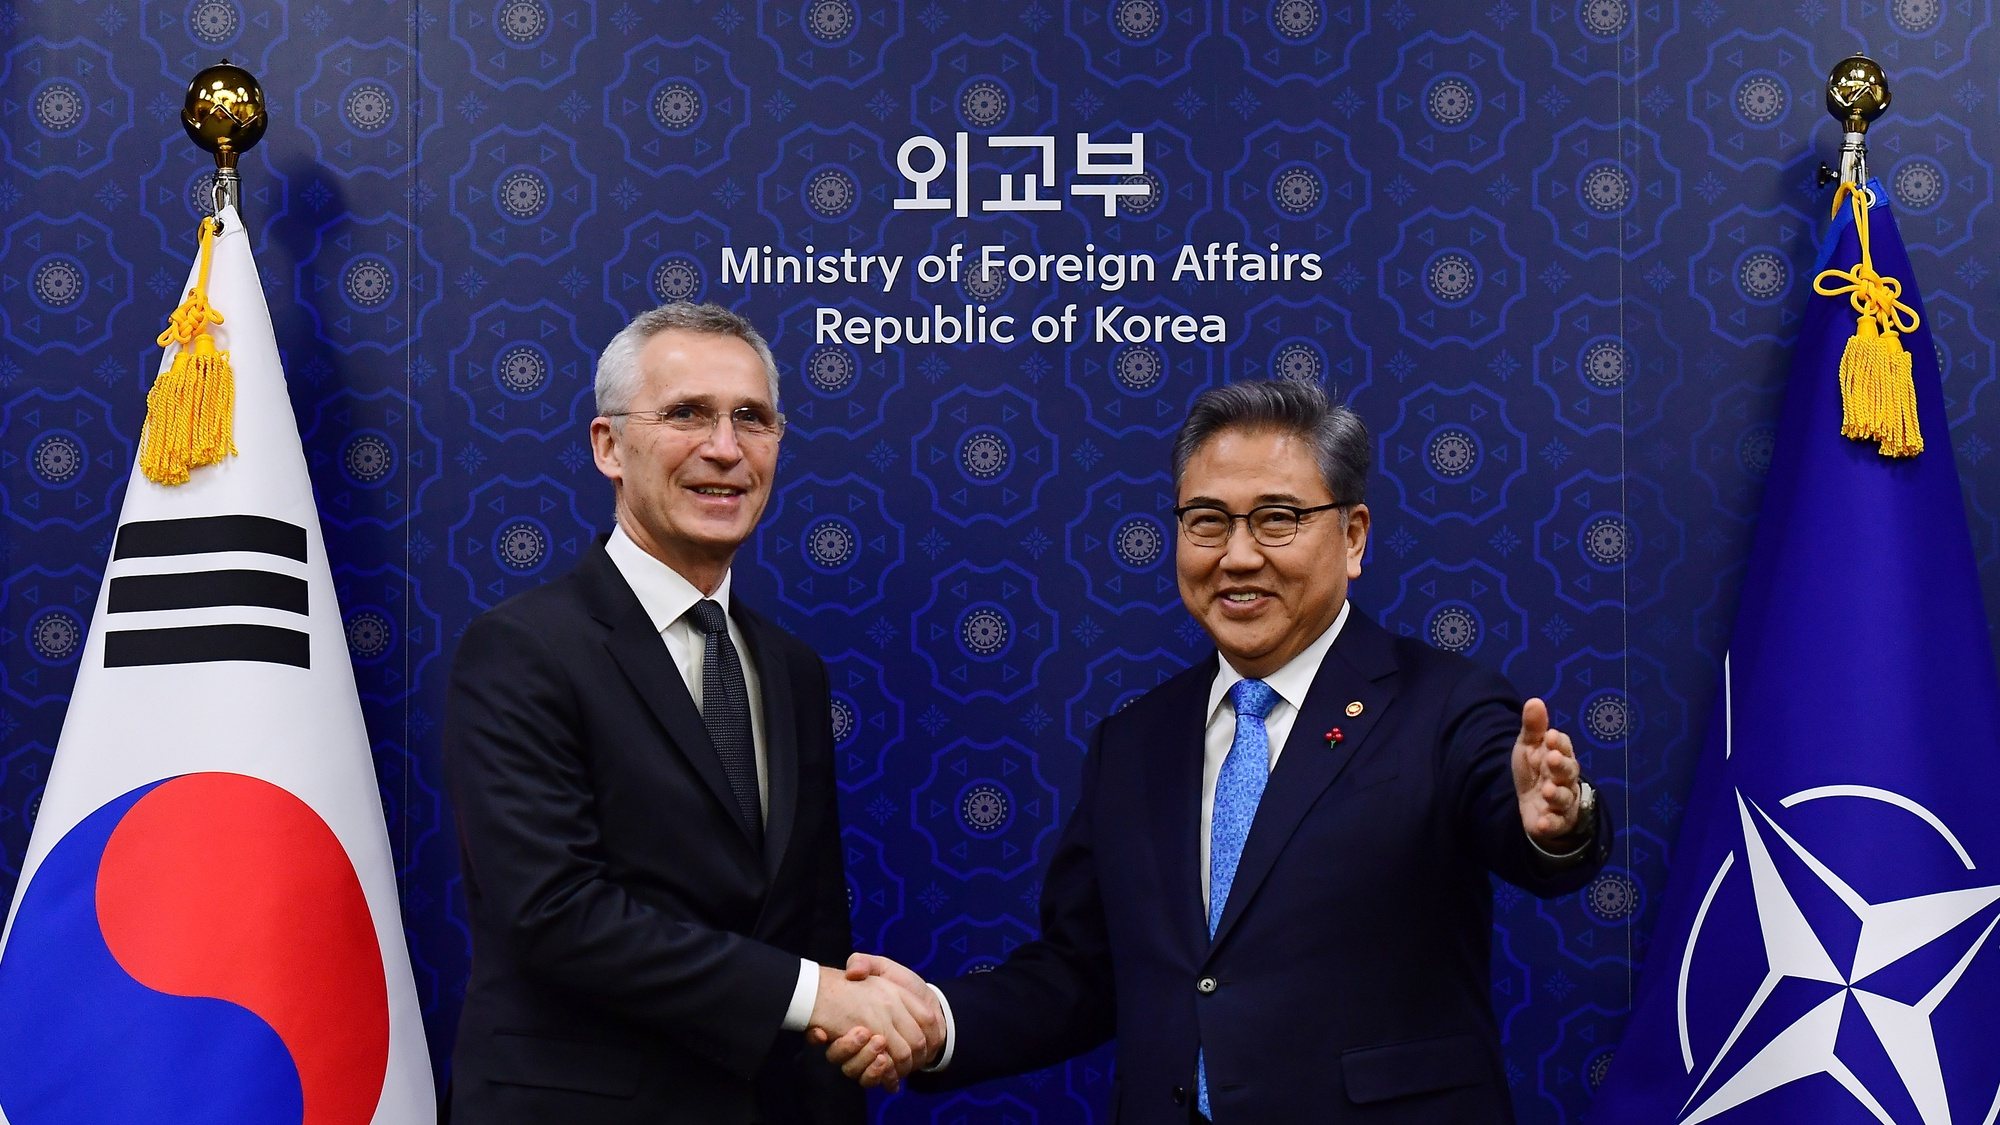 epa10437569 NATO Secretary General Jens Stoltenberg (L) shakes hands with the Minister of Foreign Affairs of South Korea Park Jin (R) during their meeting at the Foreign Ministry in Seoul, South Korea, 29 January 2023.  EPA/Kim Min-Hee / POOL